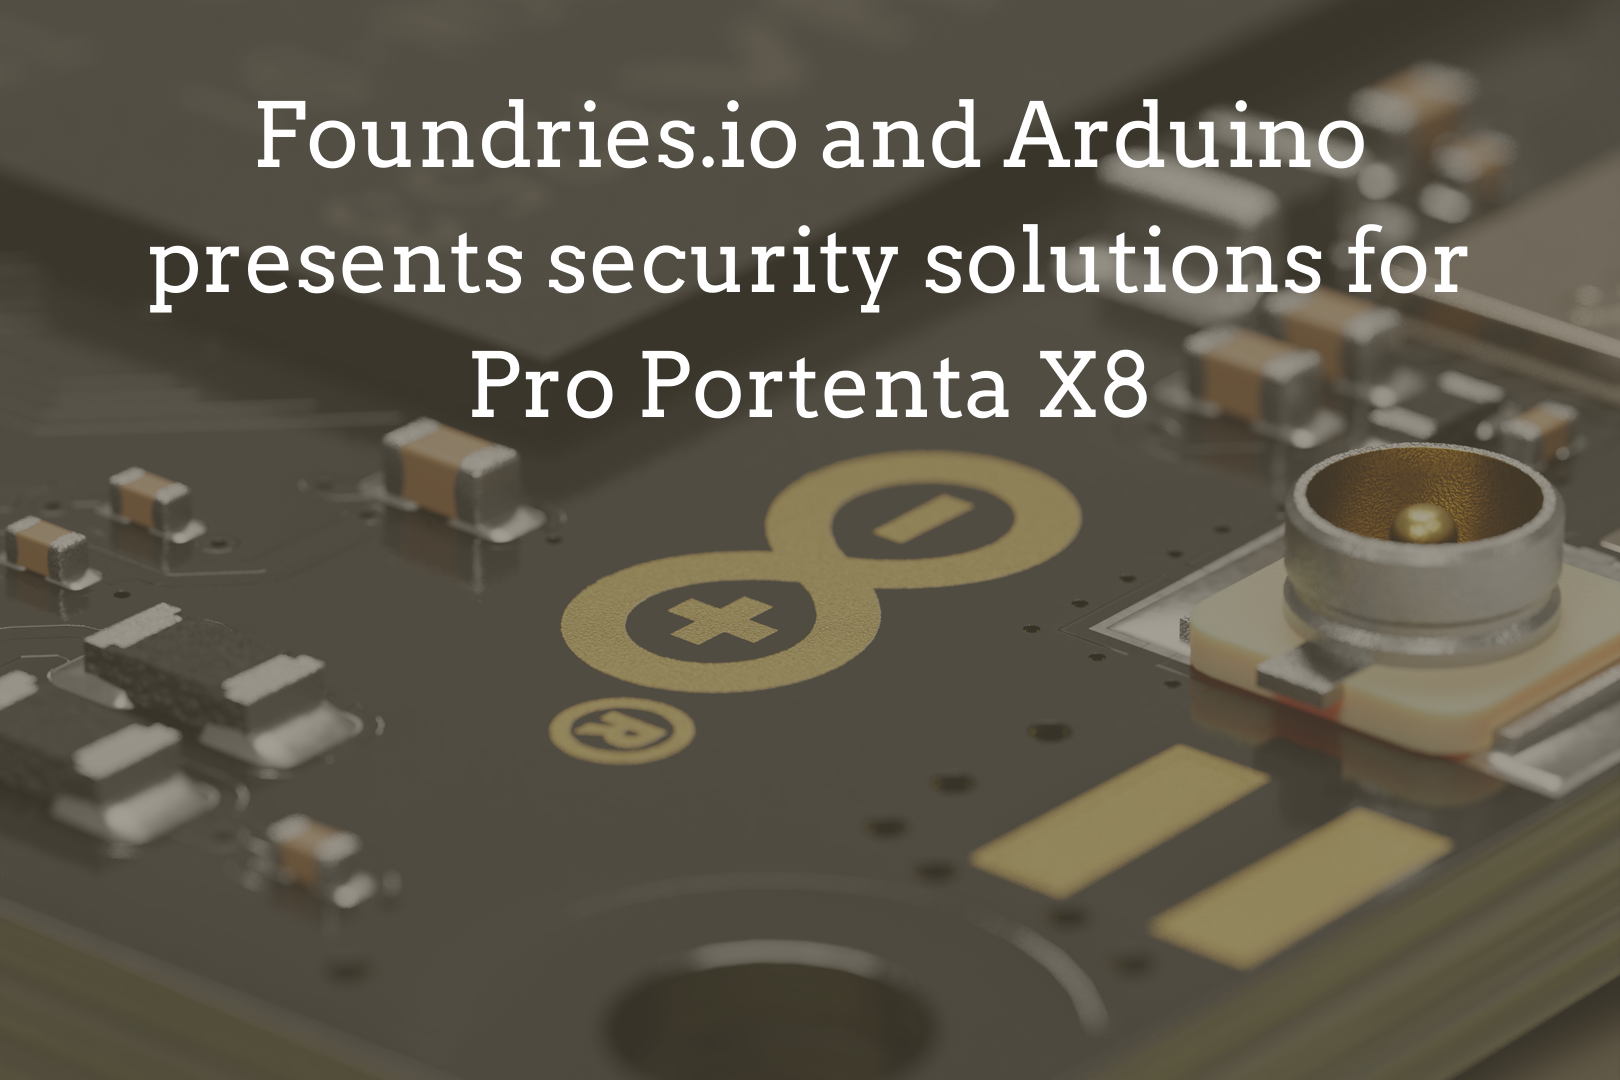 Foundries.io and Arduino presents Pro Portenta X8 for Secure IoT Solutions